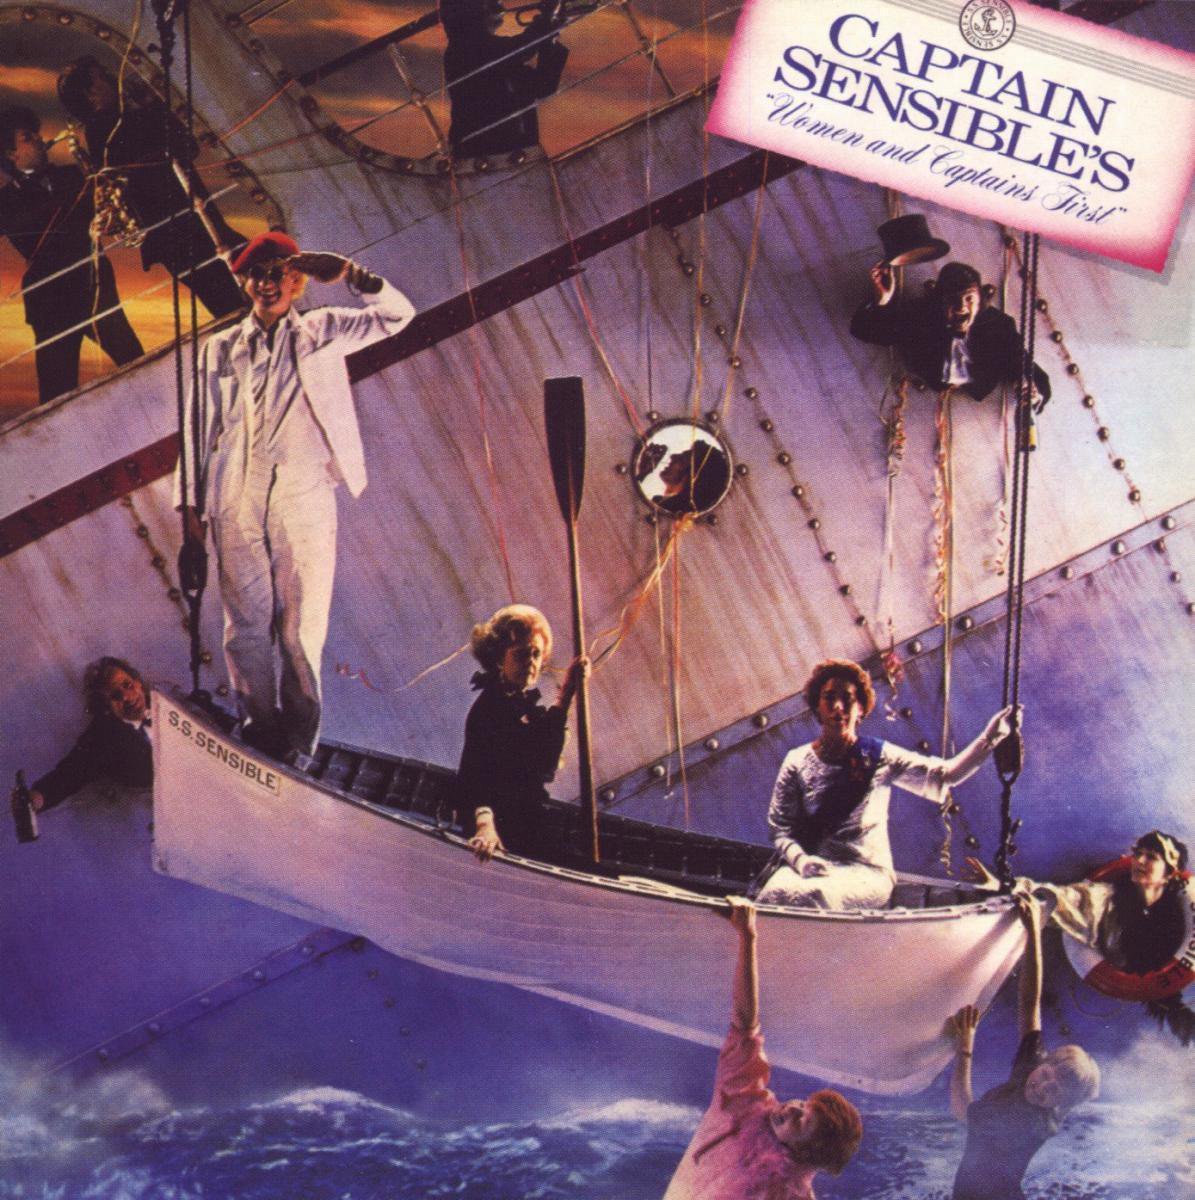 Women And Captains First - Captain Sensible